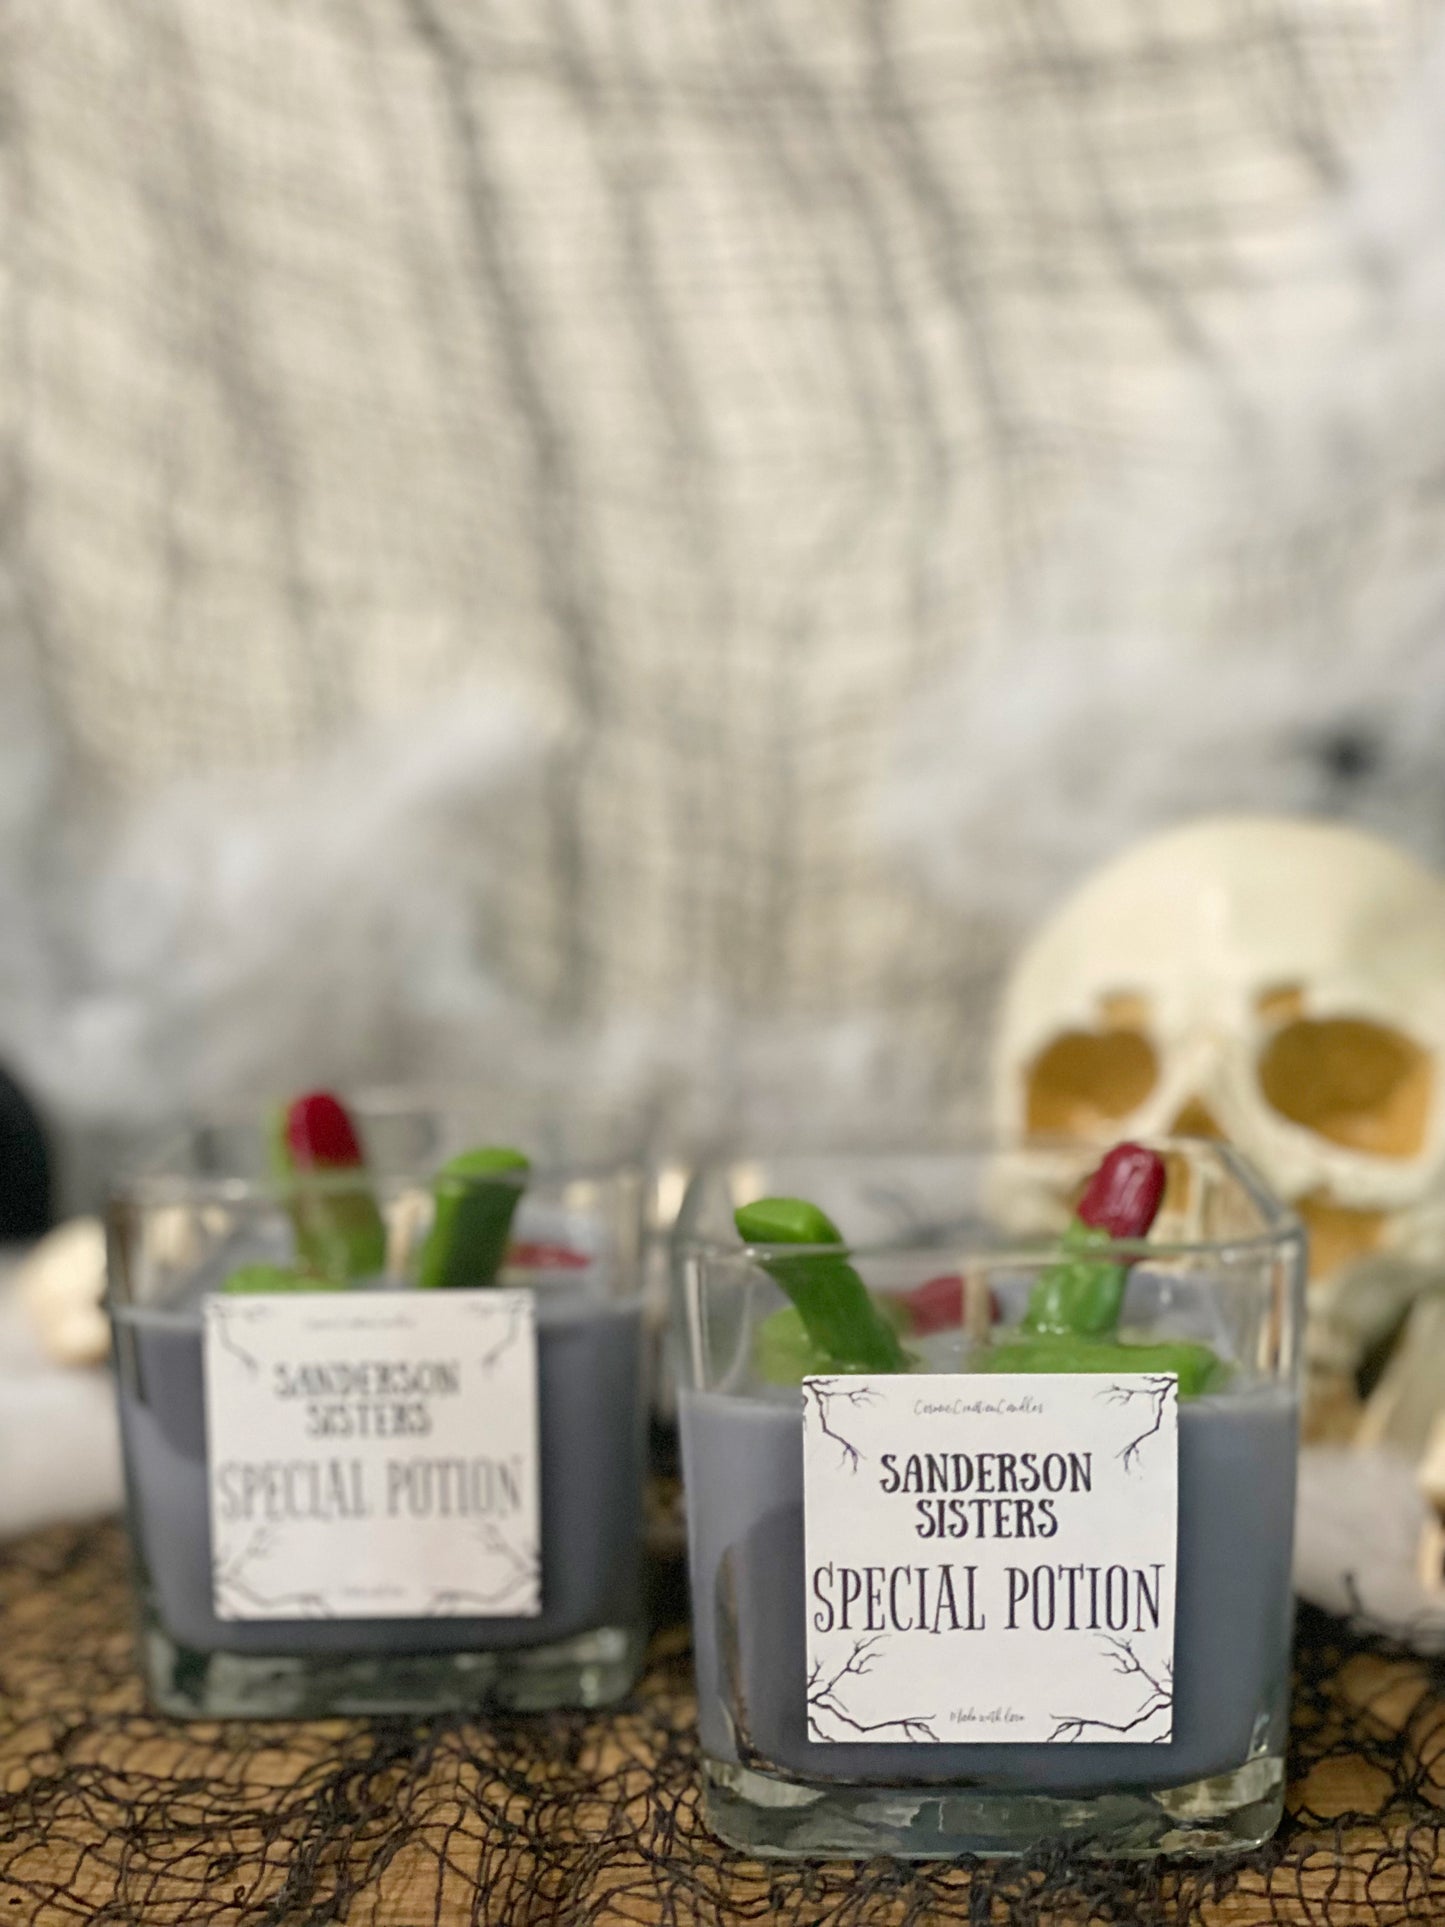 Sanderson Sisters Special Potion